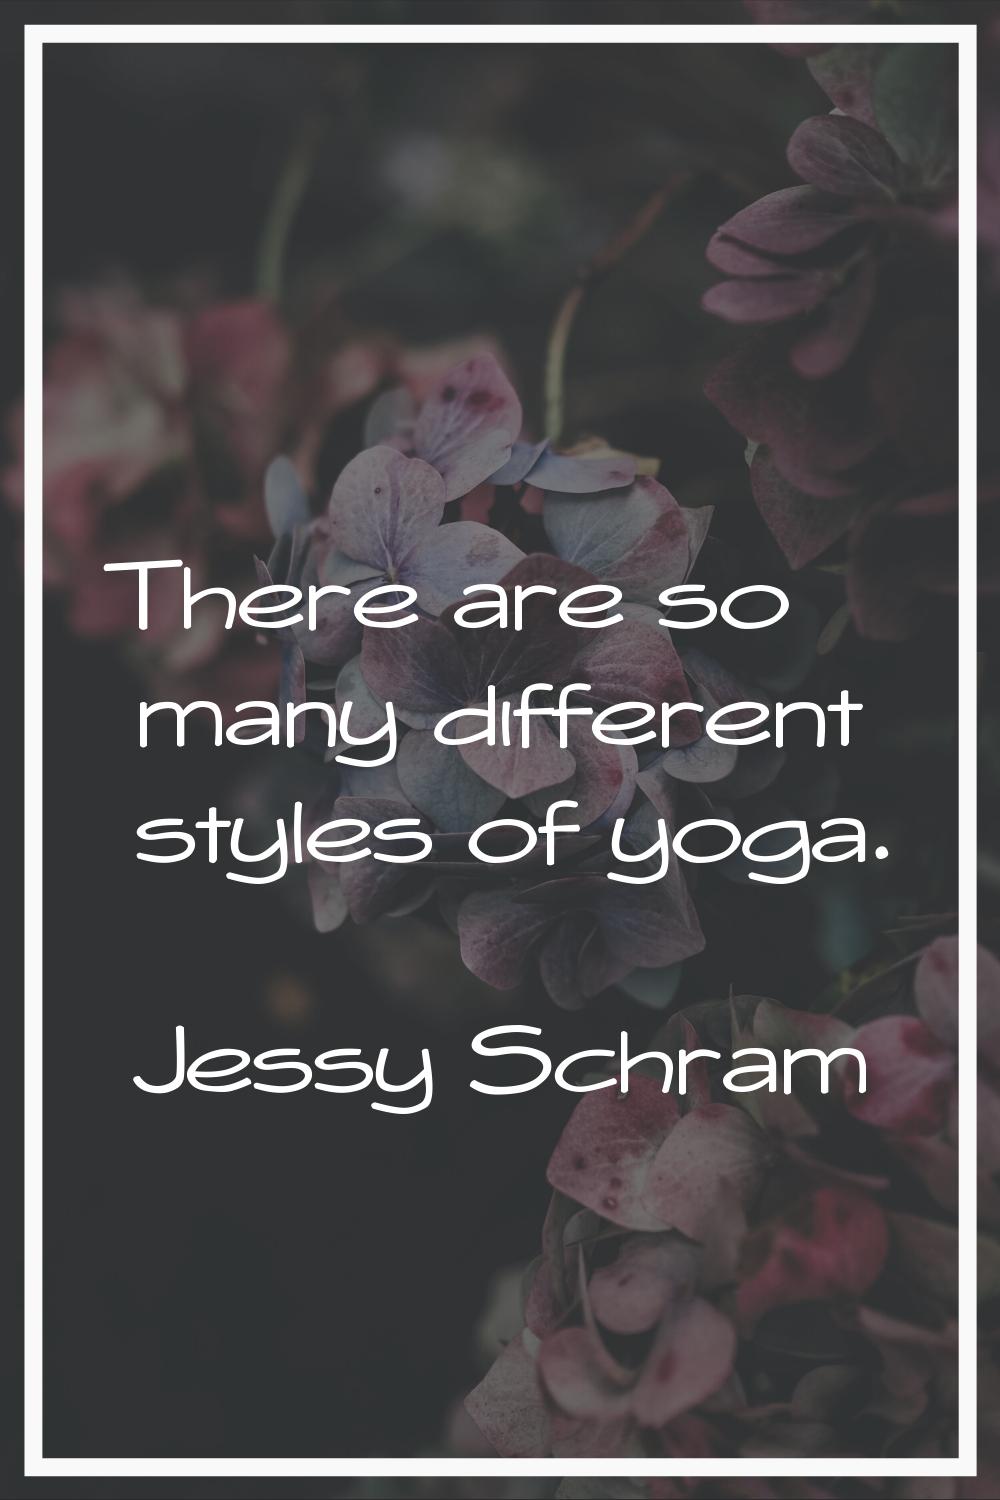 There are so many different styles of yoga.